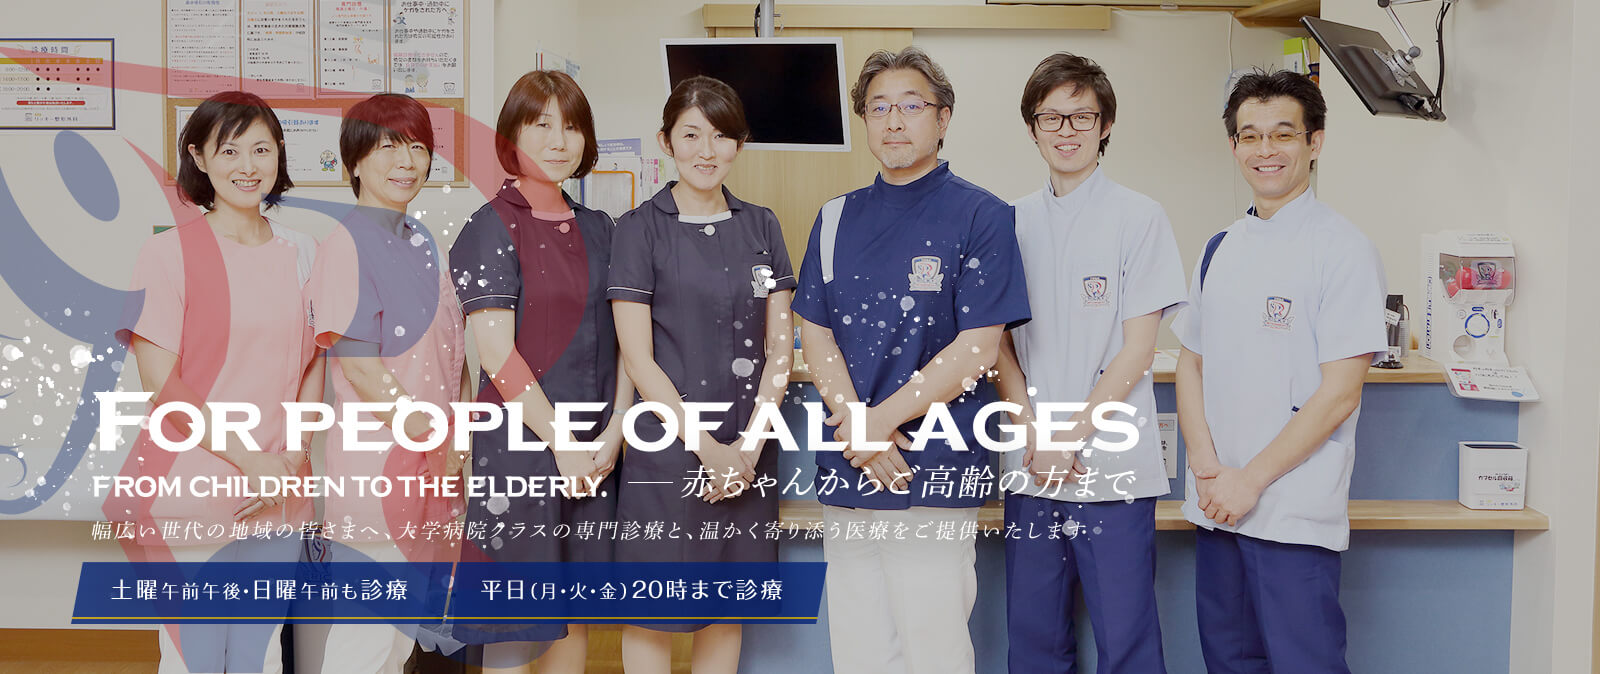 For people of all ages, from children to the elderly. 赤ちゃんからご高齢の方まで